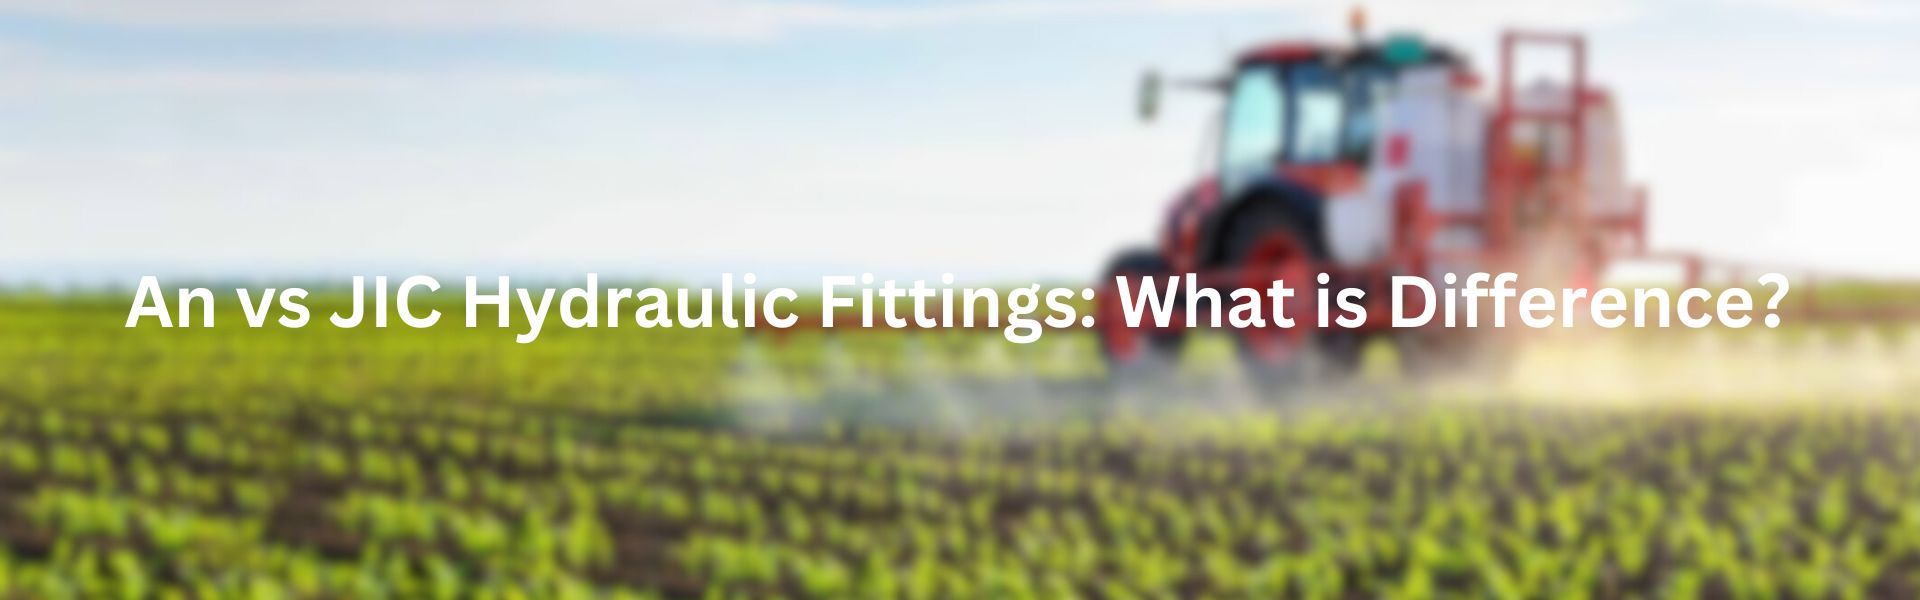 An vs JIC Hydraulic Fittings What's the Difference？Topa